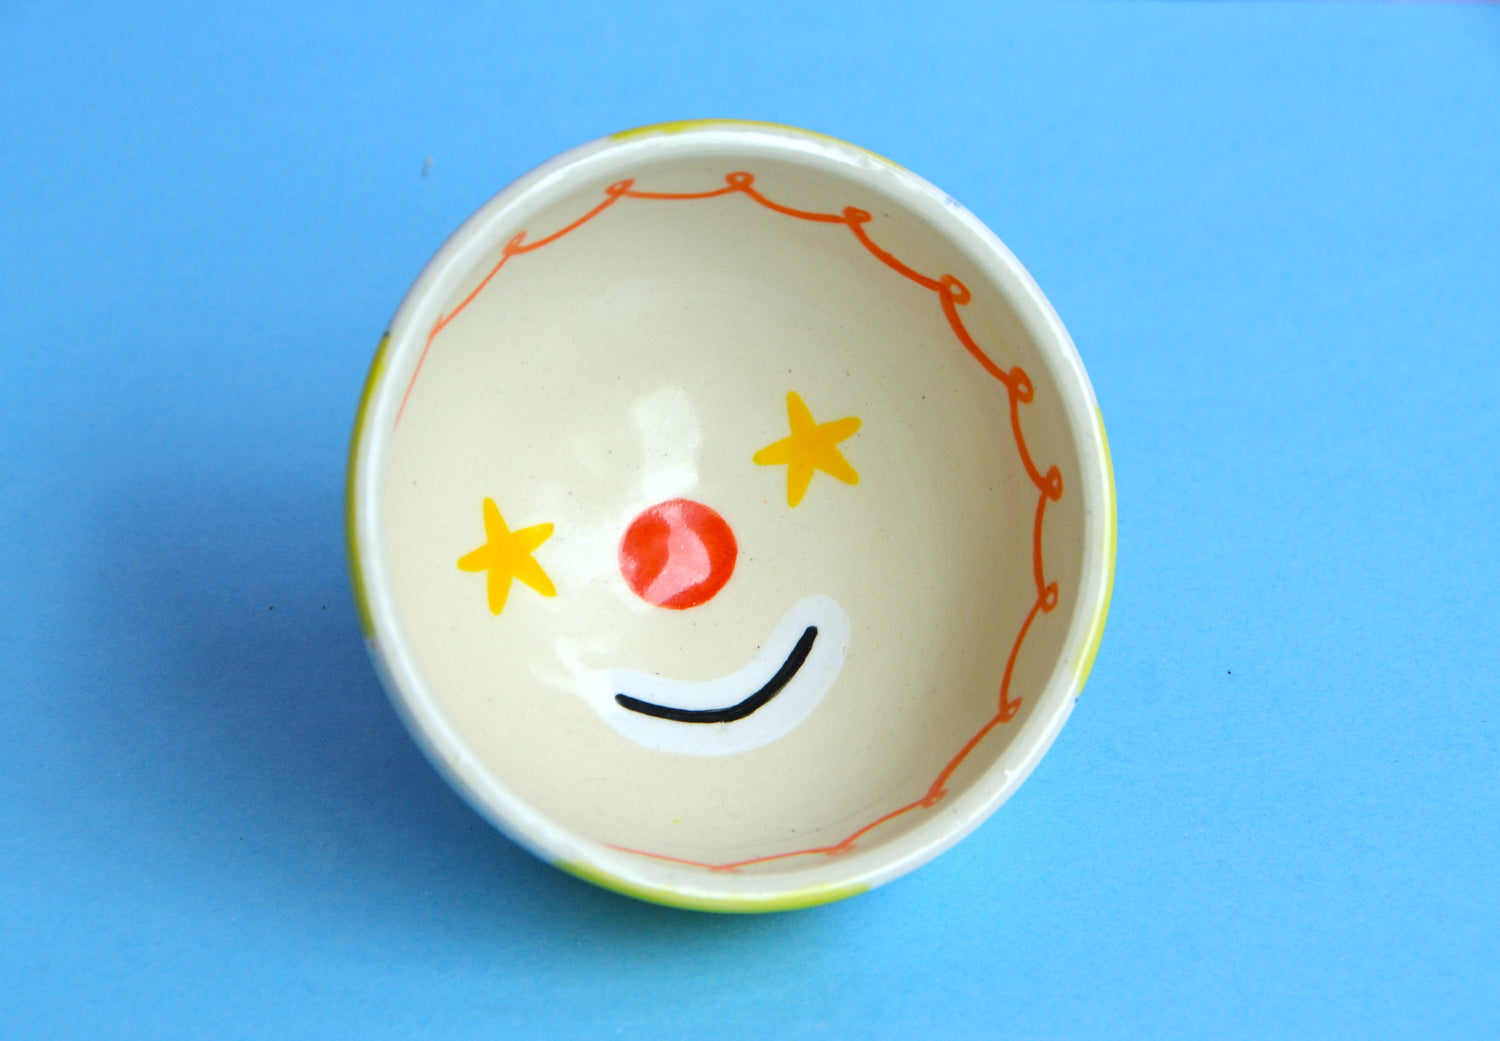 Ceramic bowl woth a starry eyed clown face design on a blue background 